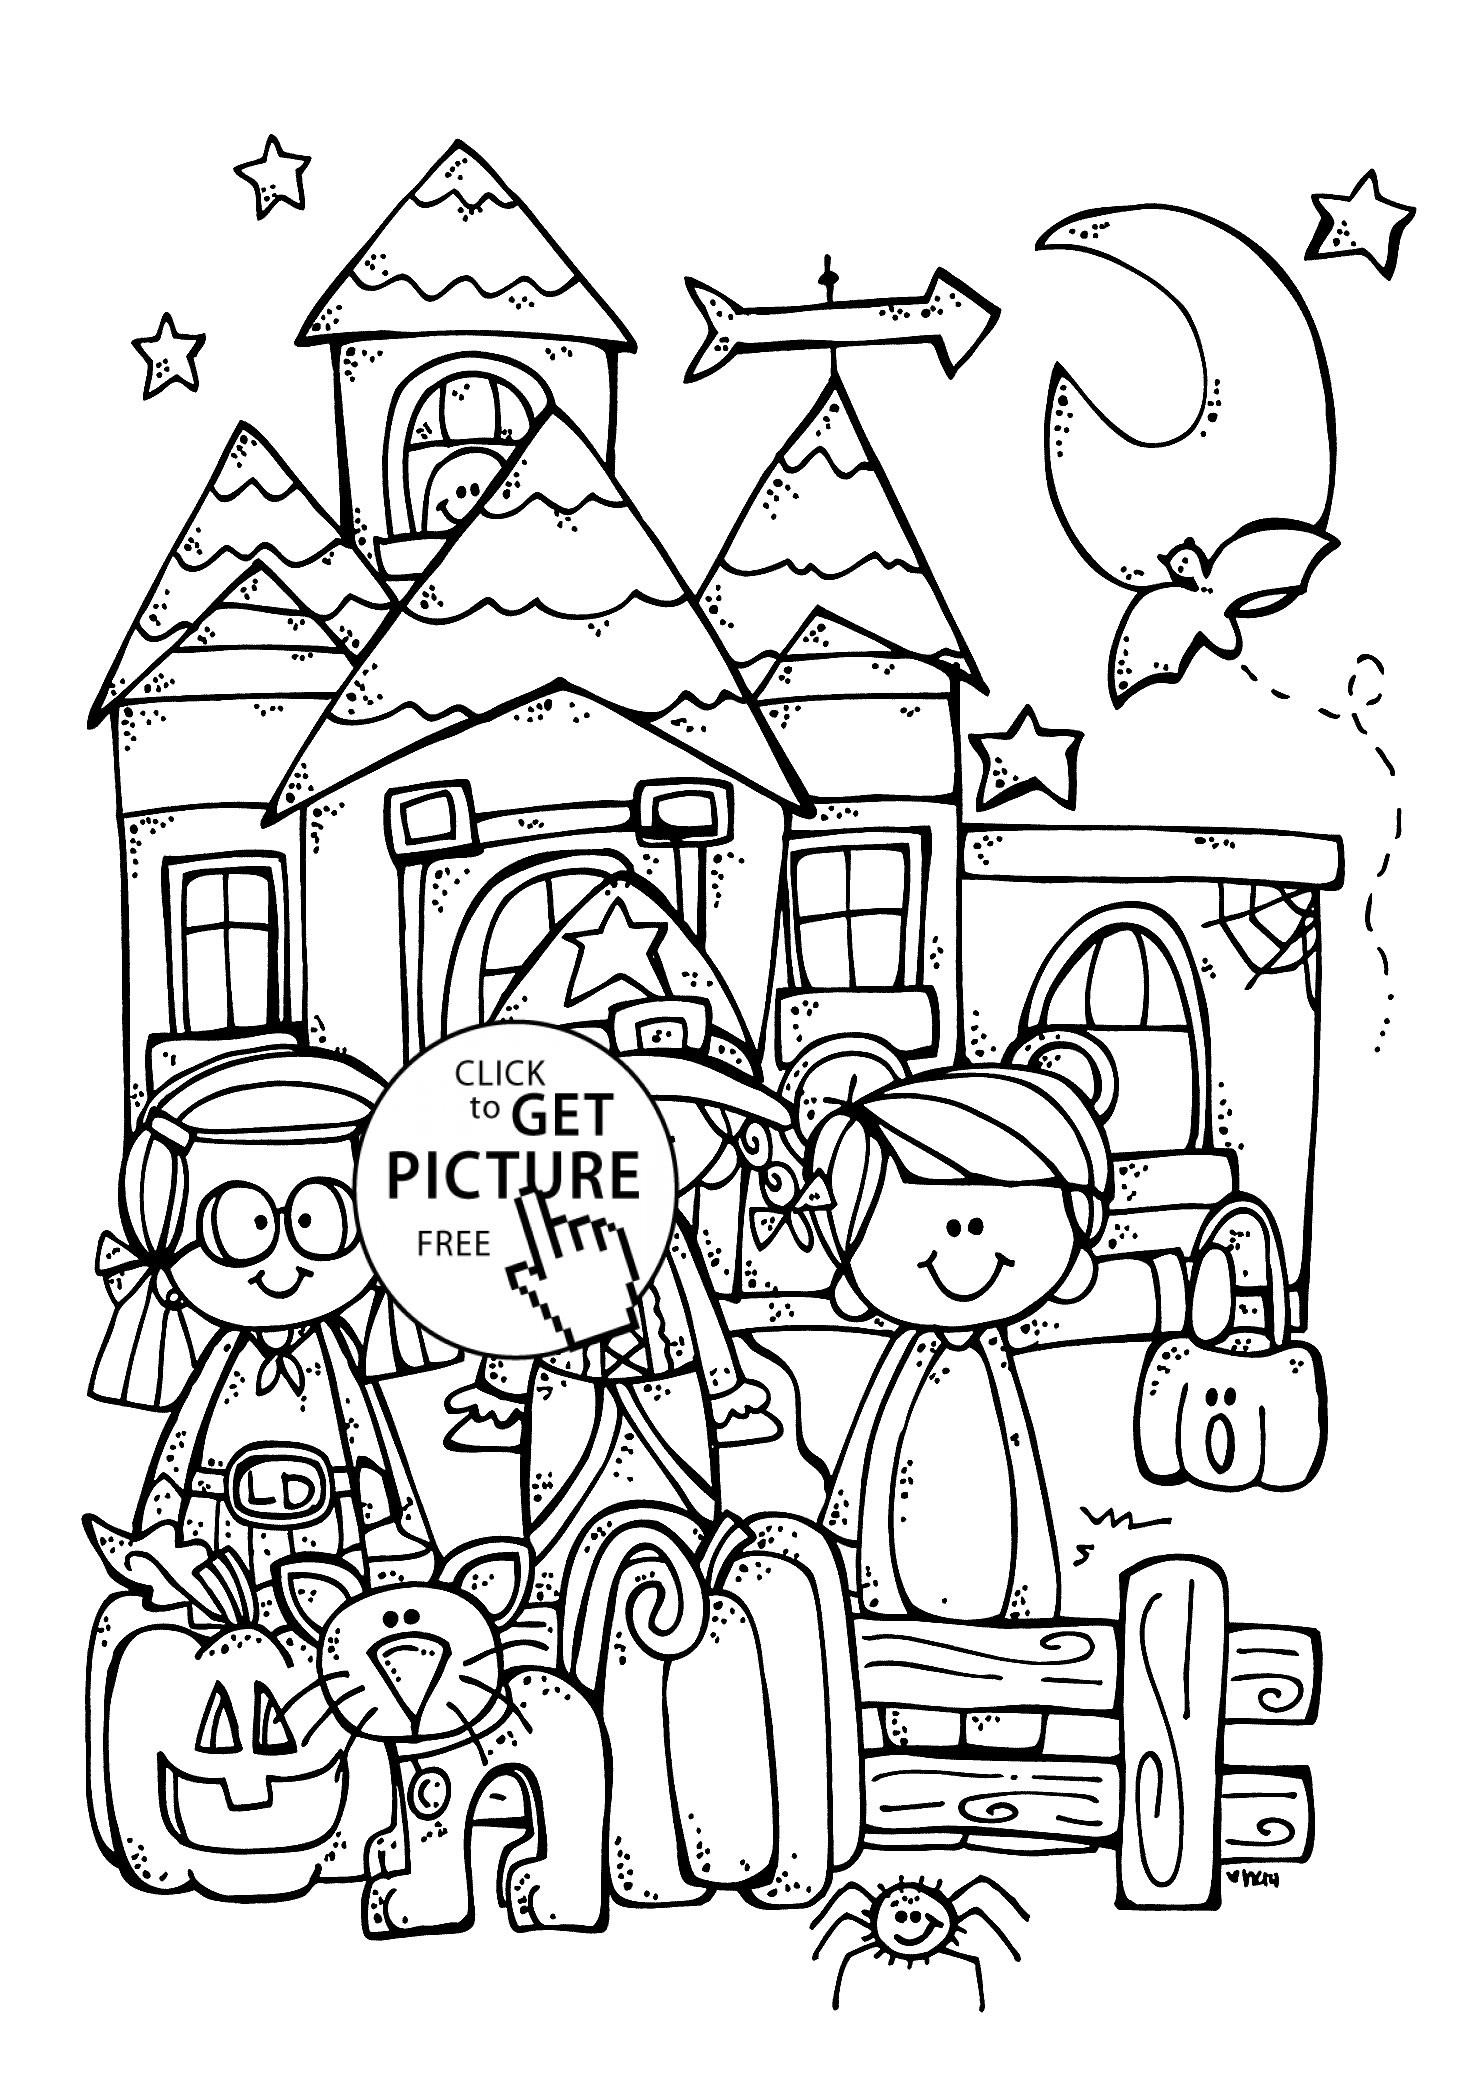 Funny kids and Halloween coloring page for kids, printable free ...